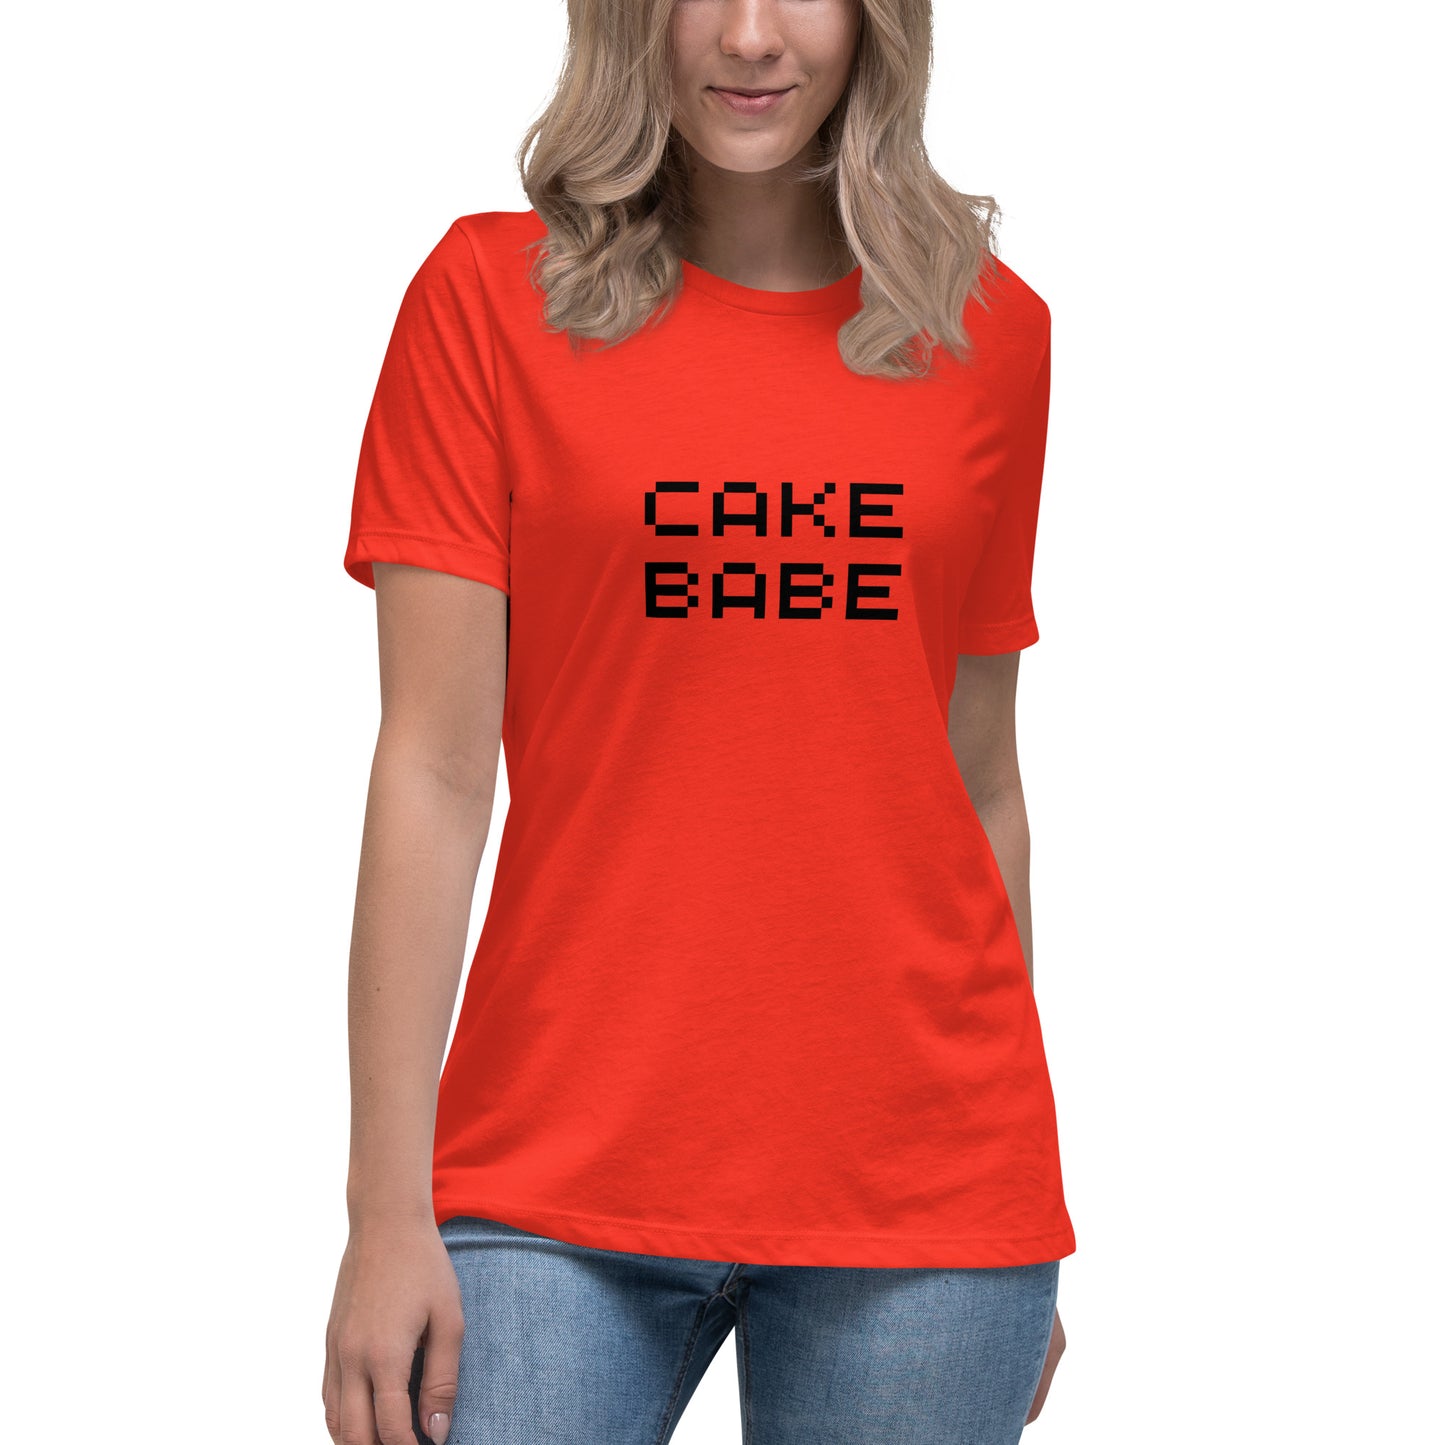 Cake Babe Women's Relaxed T-Shirt